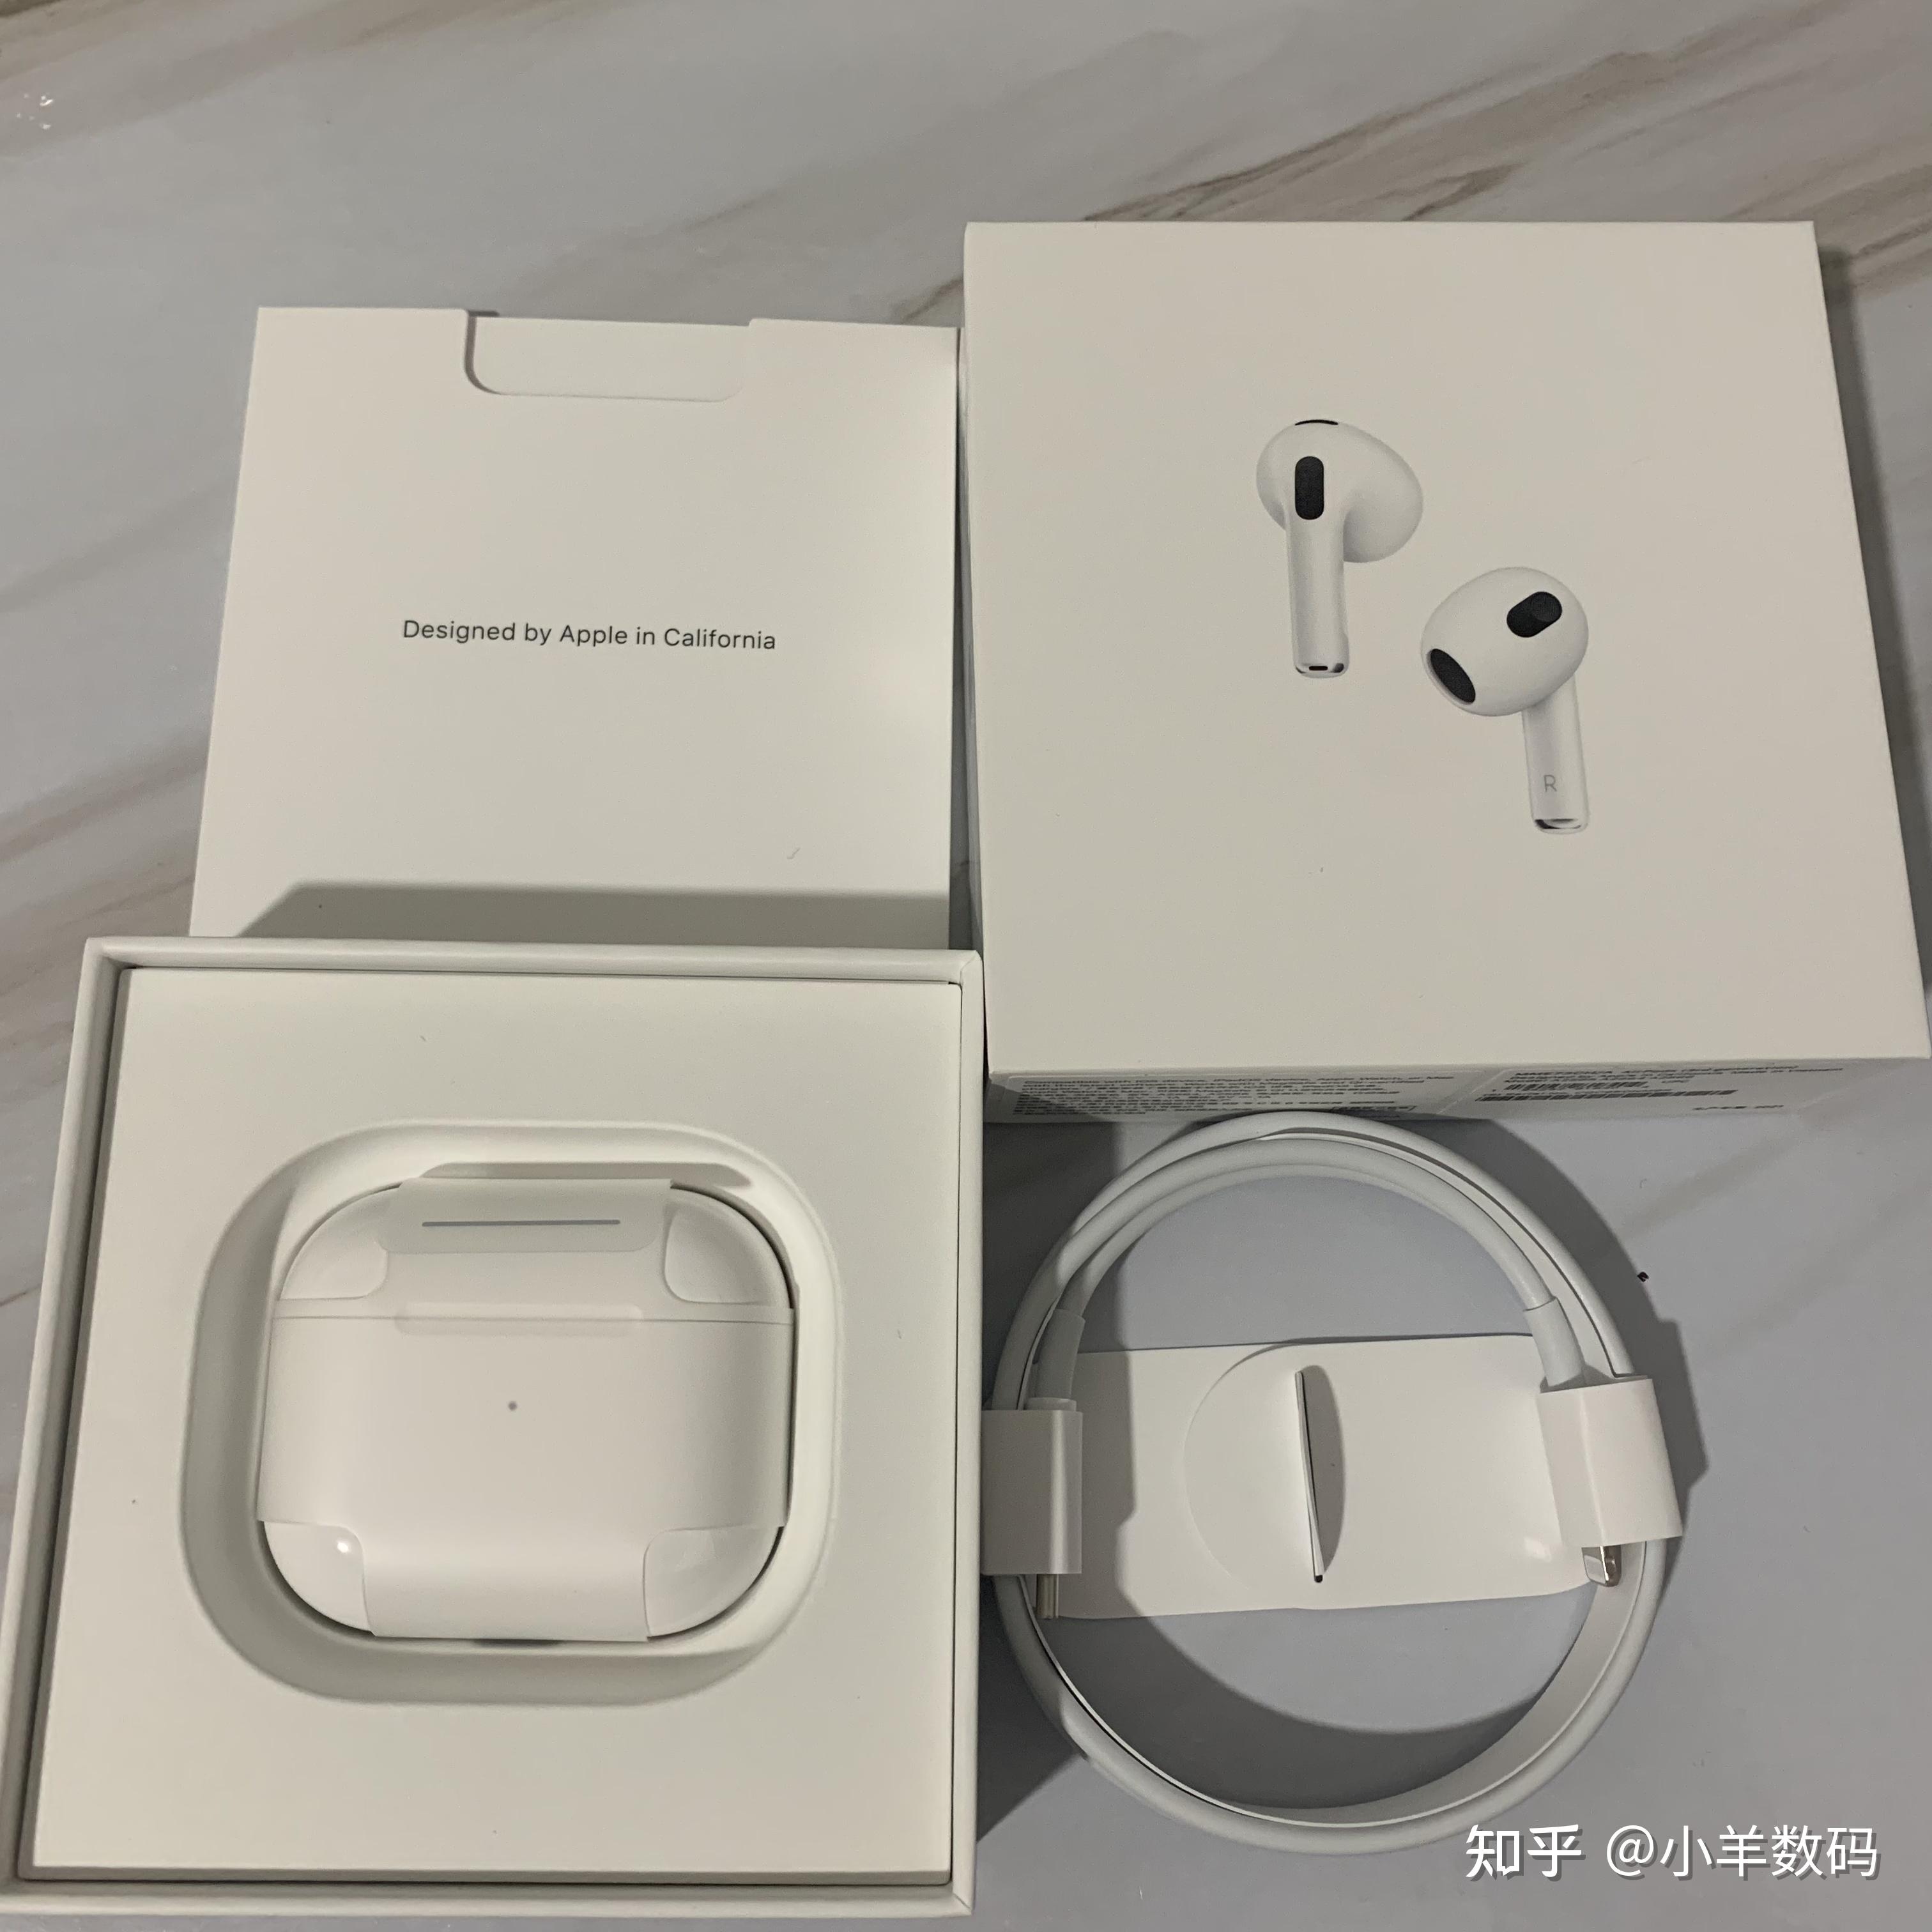 1,airpods 3 包装